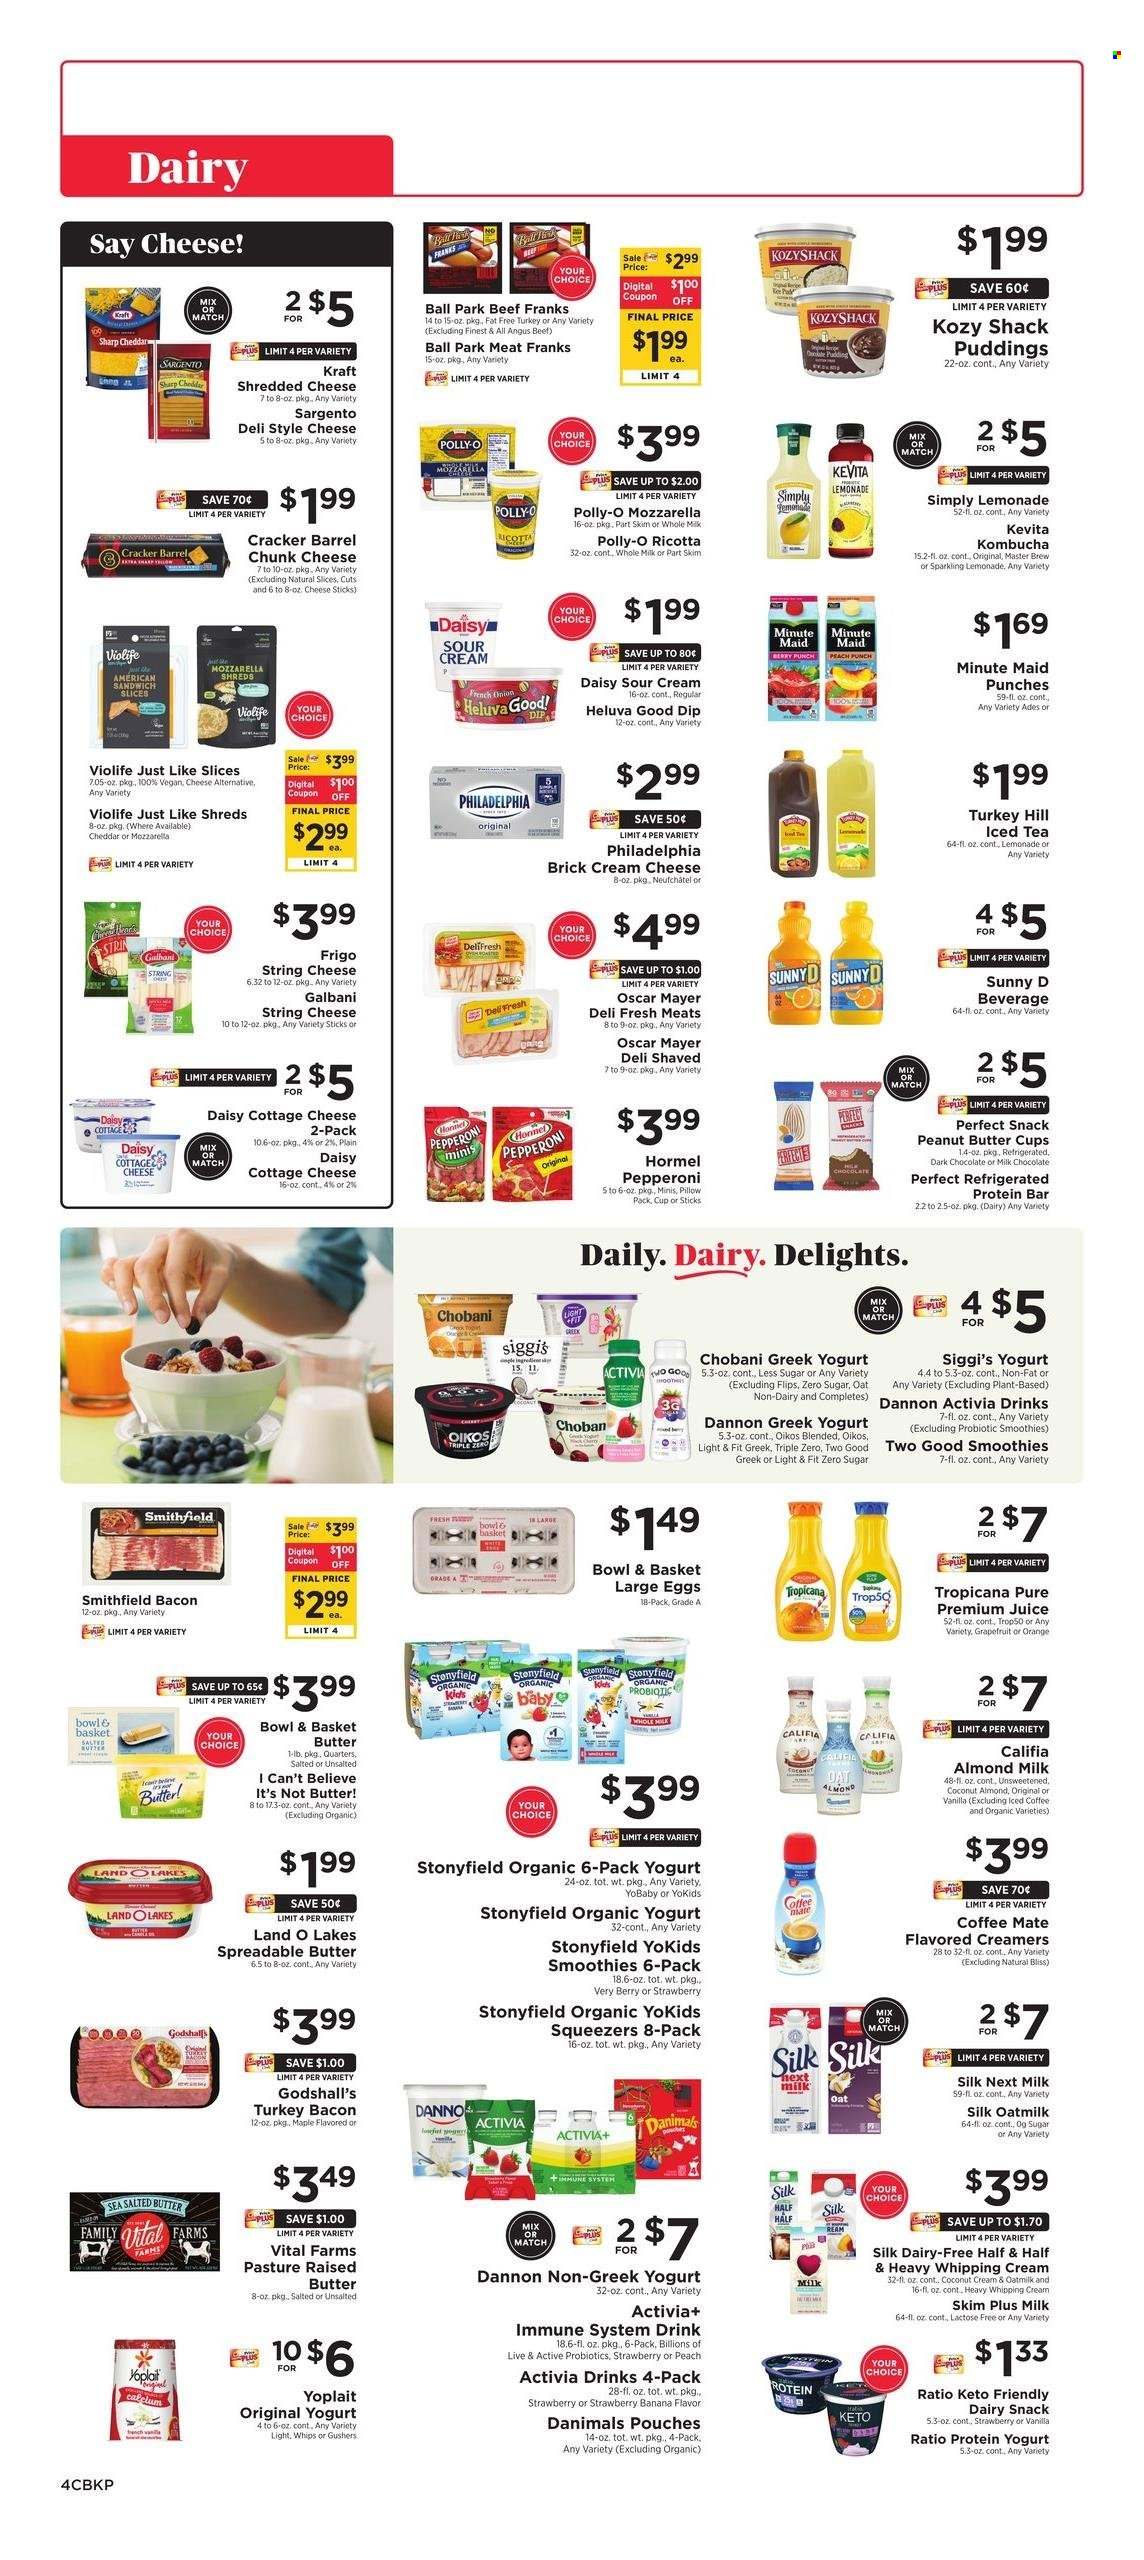 thumbnail - ShopRite Flyer - 05/21/2023 - 05/27/2023 - Sales products - Bowl & Basket, grapefruits, oranges, sandwich, Kraft®, Hormel, bacon, turkey bacon, snack, Oscar Mayer, pepperoni, frankfurters, cottage cheese, cream cheese, mozzarella, Neufchâtel, ricotta, sandwich slices, shredded cheese, string cheese, Philadelphia, cheddar, Galbani, chunk cheese, Sargento, greek yoghurt, pudding, yoghurt, organic yoghurt, Activia, Oikos, Yoplait, Chobani, Dannon, Danimals, almond milk, Coffee-Mate, Silk, oat milk, large eggs, salted butter, spreadable butter, I Can't Believe It's Not Butter, sour cream, whipping cream, dip, Ola, cheese sticks, crackers, dark chocolate, peanut butter cups, oats, protein bar, lemonade, juice, ice tea, fruit punch, smoothie, iced coffee, kombucha, KeVita, beef meat, probiotics, Half and half. Page 4.